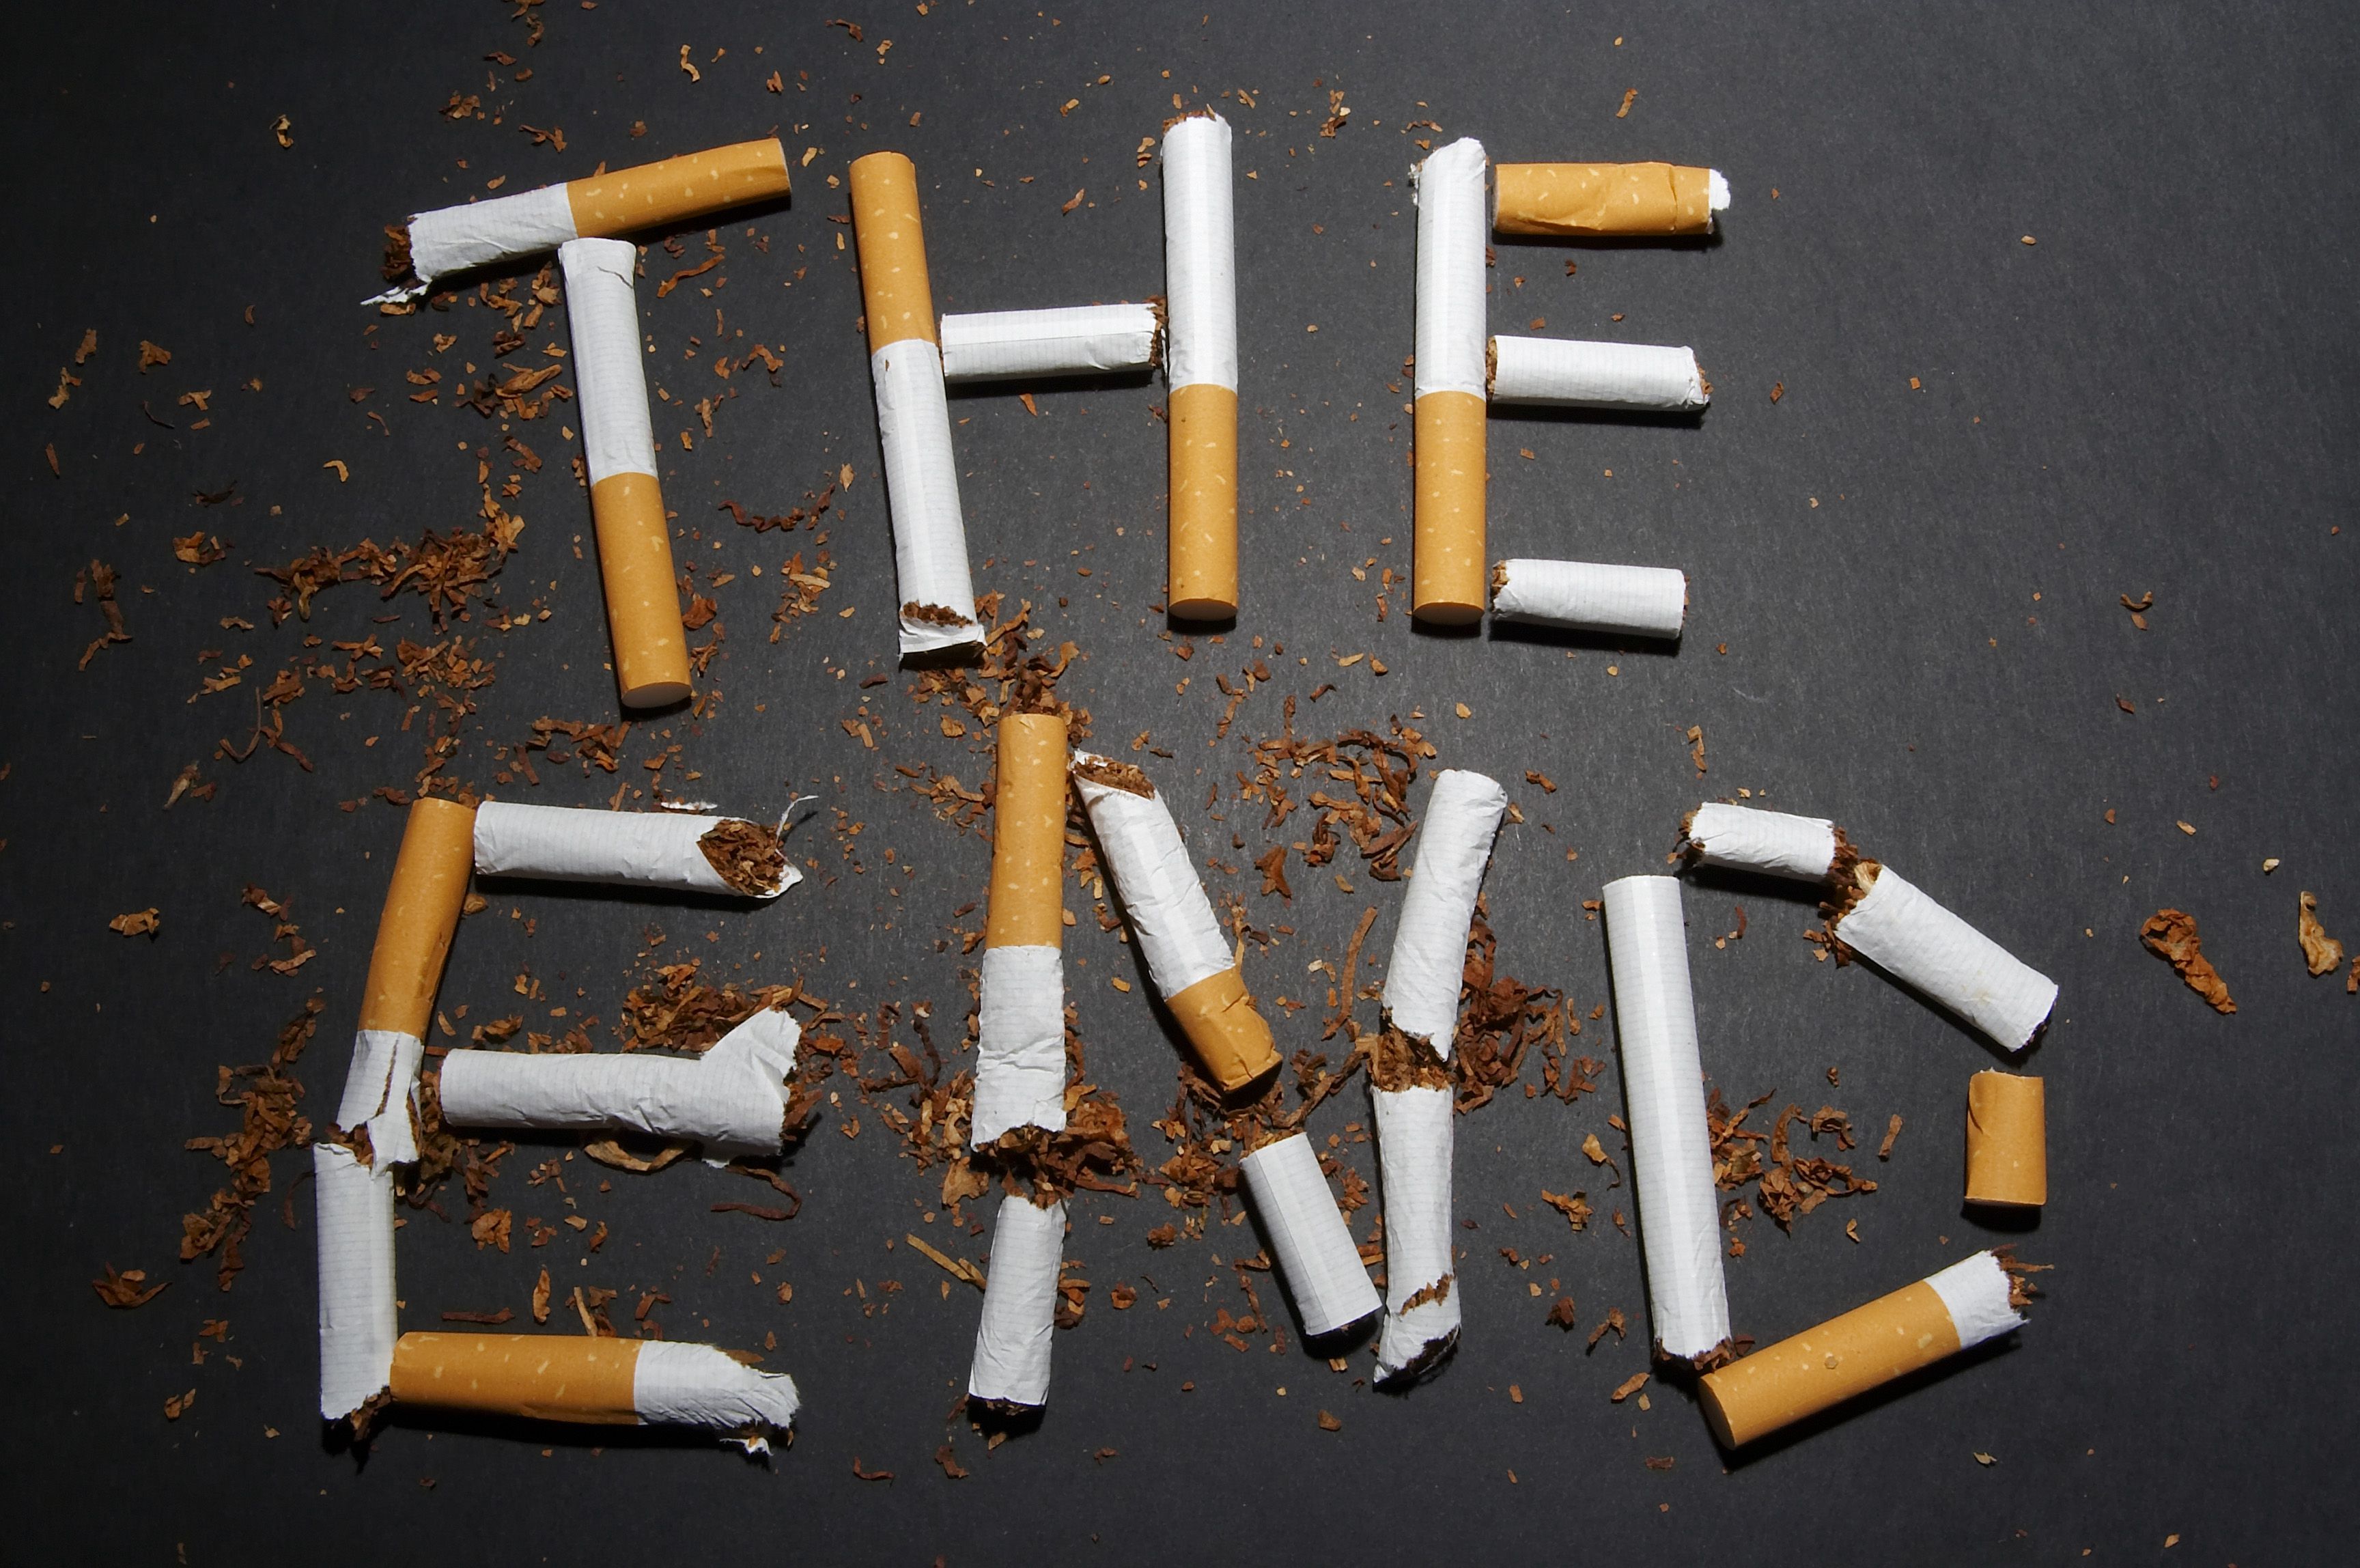 Smoking: causes damage to almost every organ in the body and is directly responsible for a number of diseases.